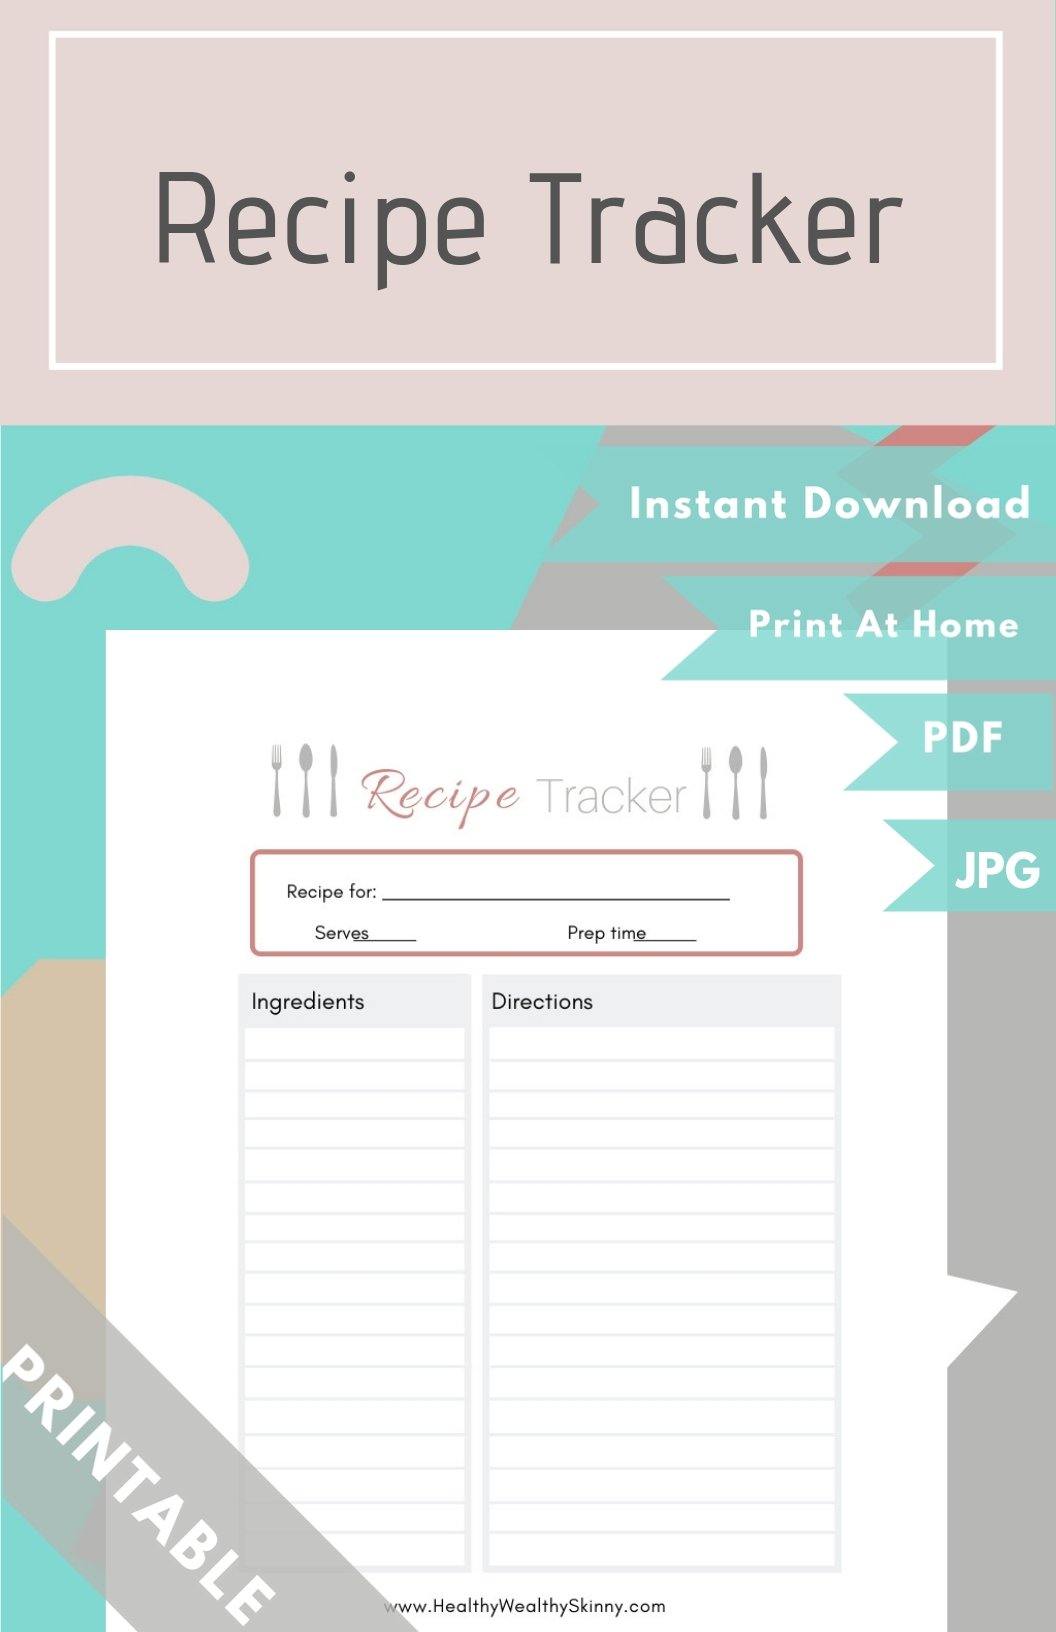 Recipe Tracker PDF+ JPEG ( Available in Various Colors) - Healthy Wealthy Skinny